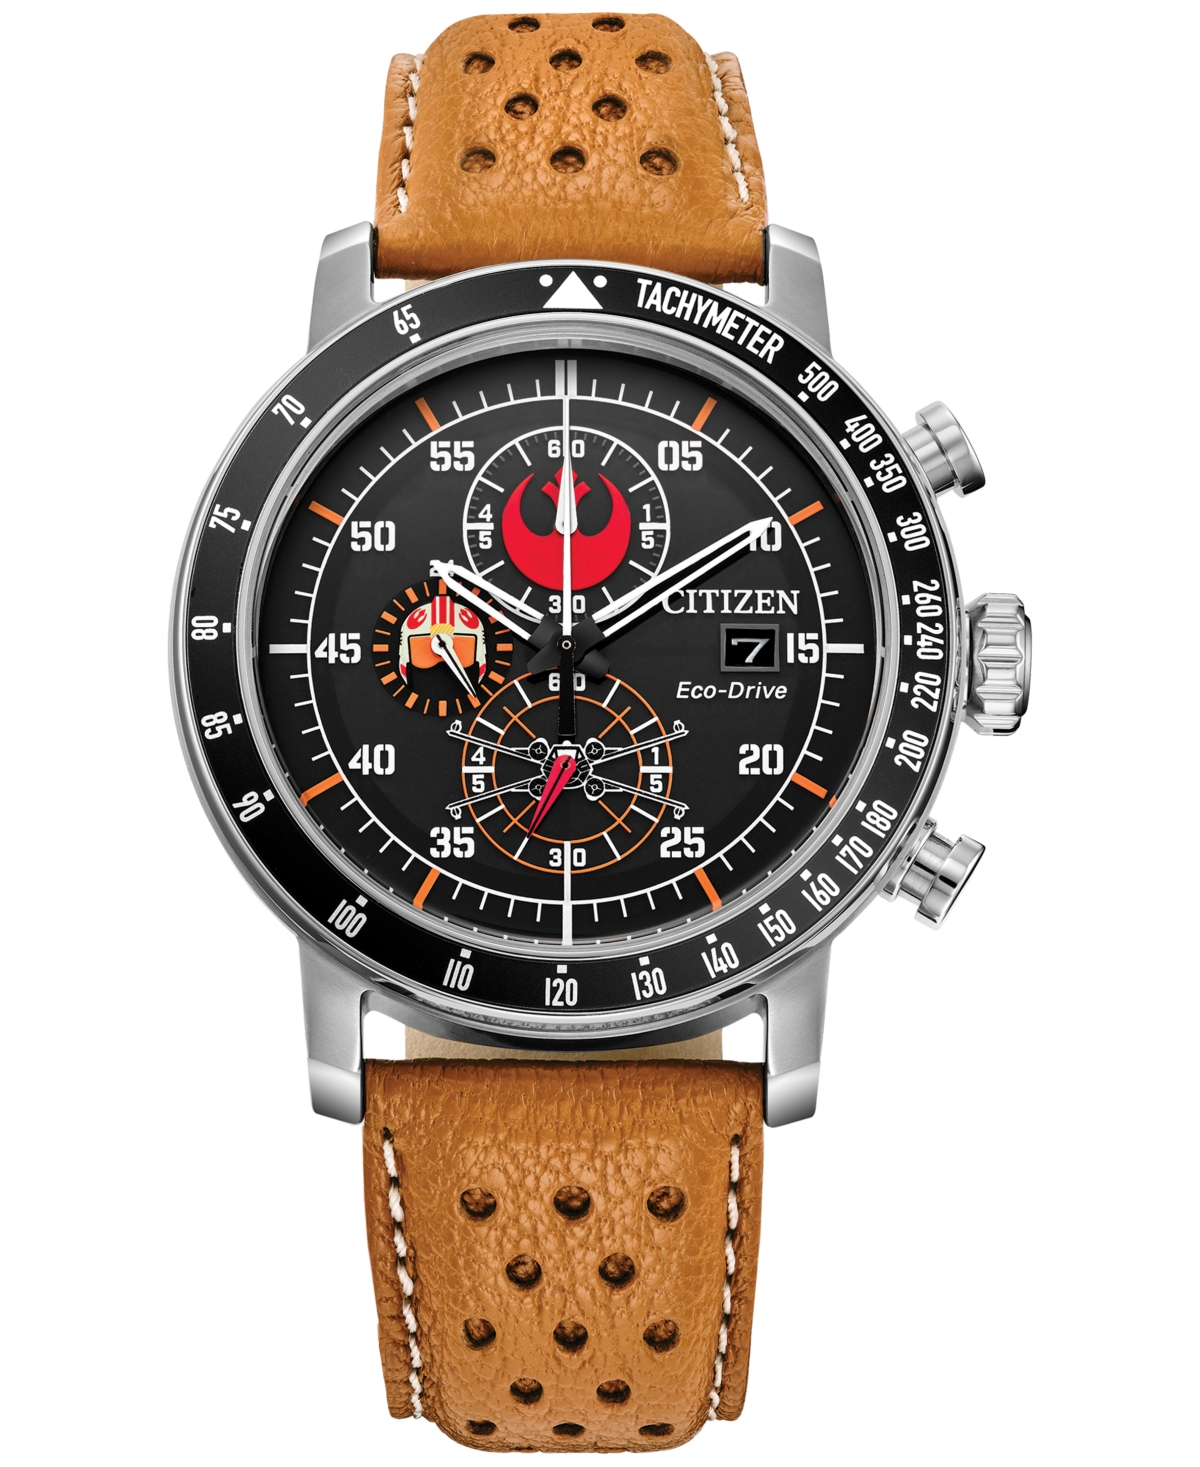 Citizen Eco-drive Men's Chronograph Star Wars Rebel Pilot Orange Perforated Leather Strap Watch 44mm In Black